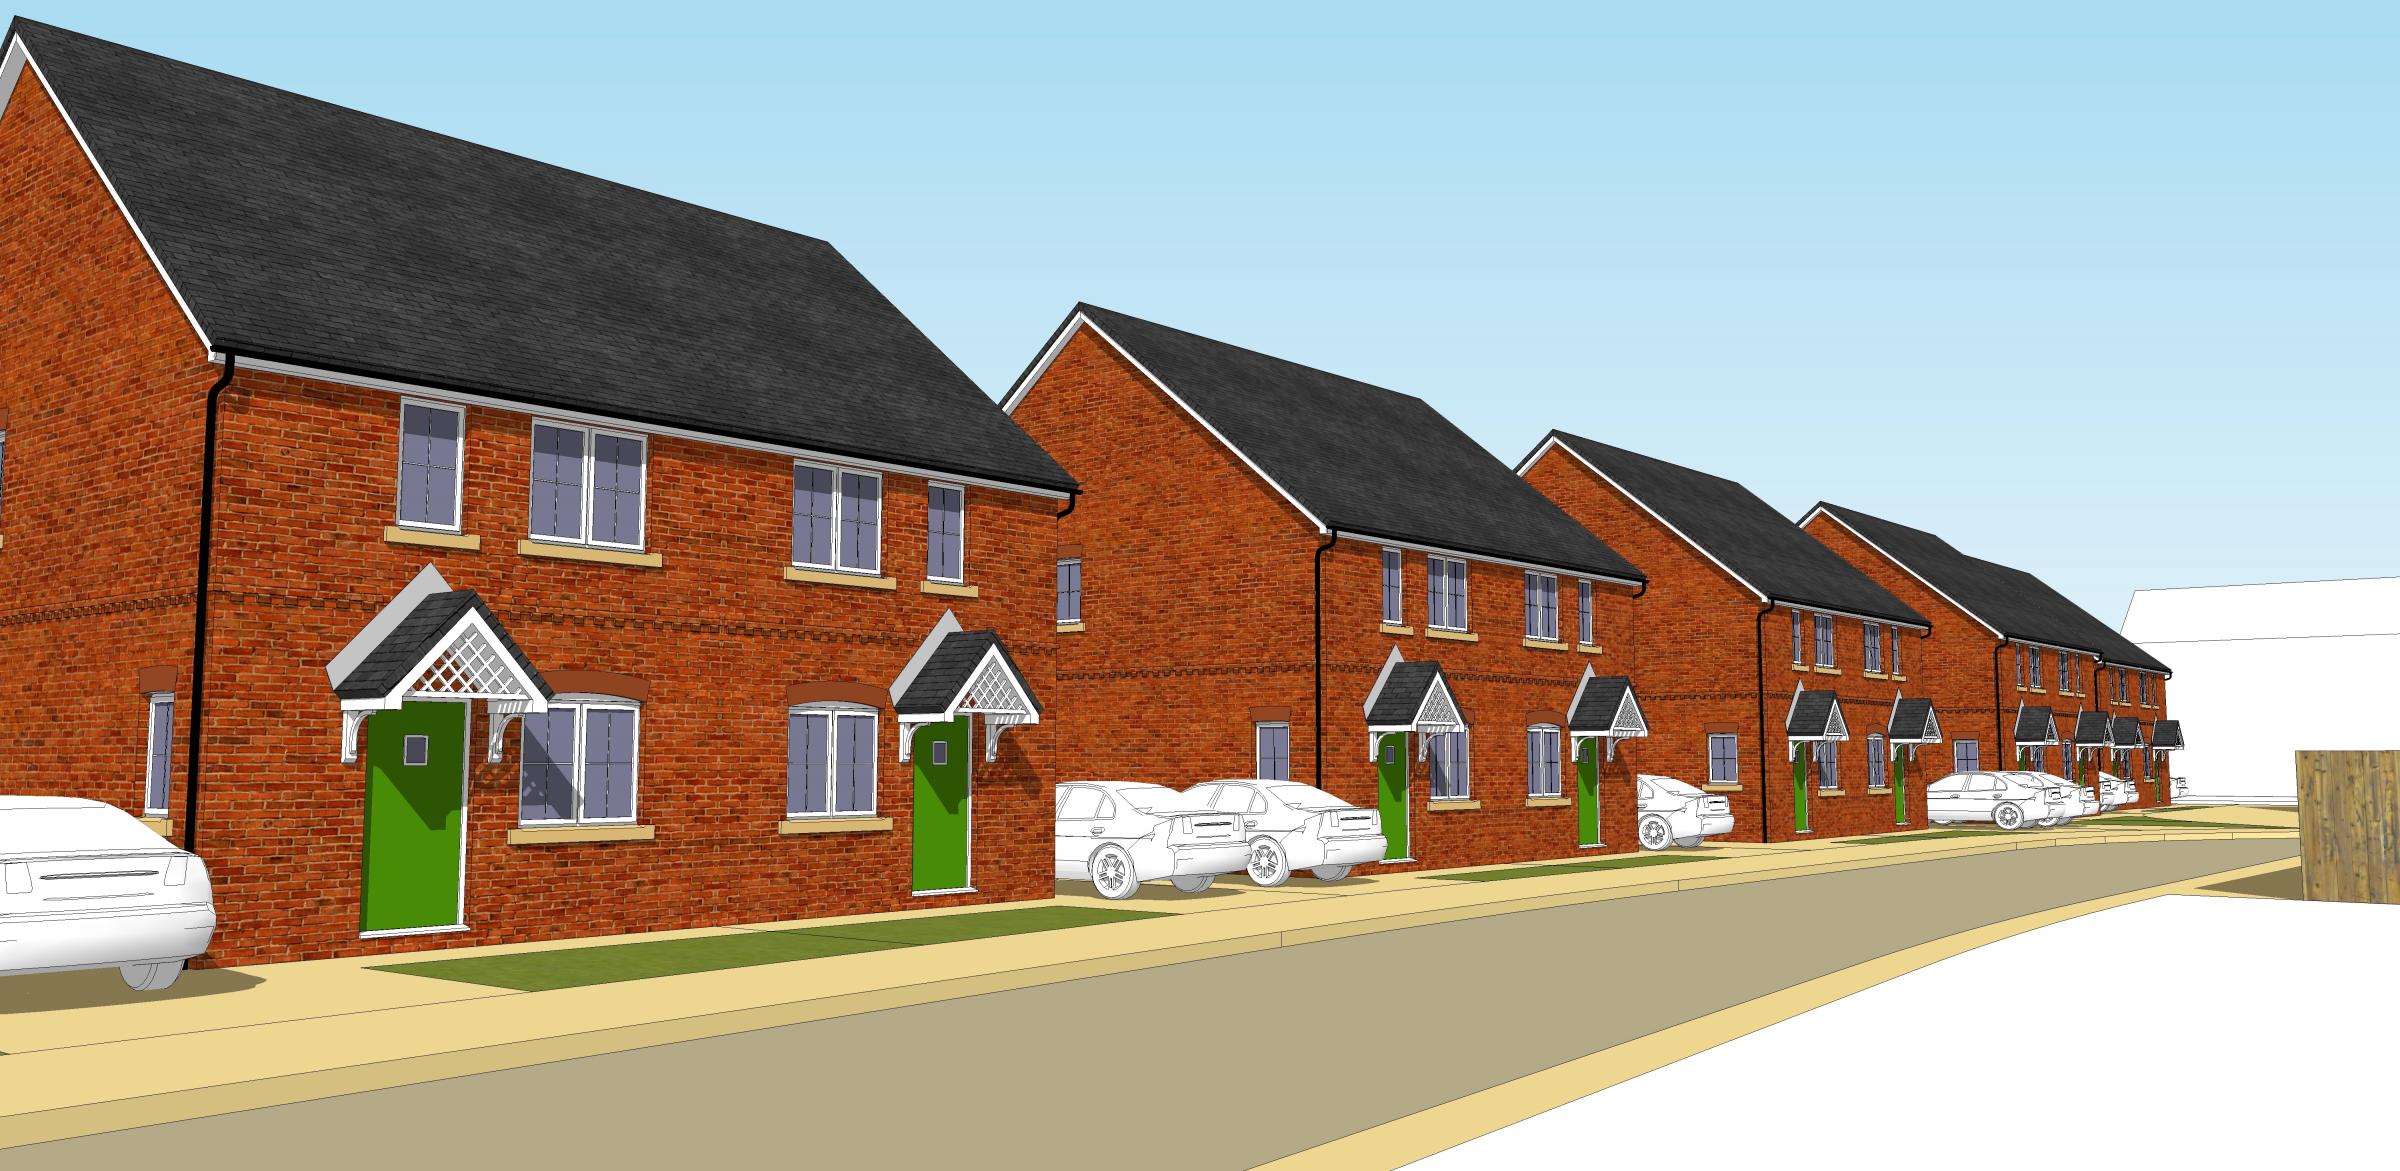 Council approves plans for 46 new homes in Bewsey in £5.5m development - Warrington Guardian